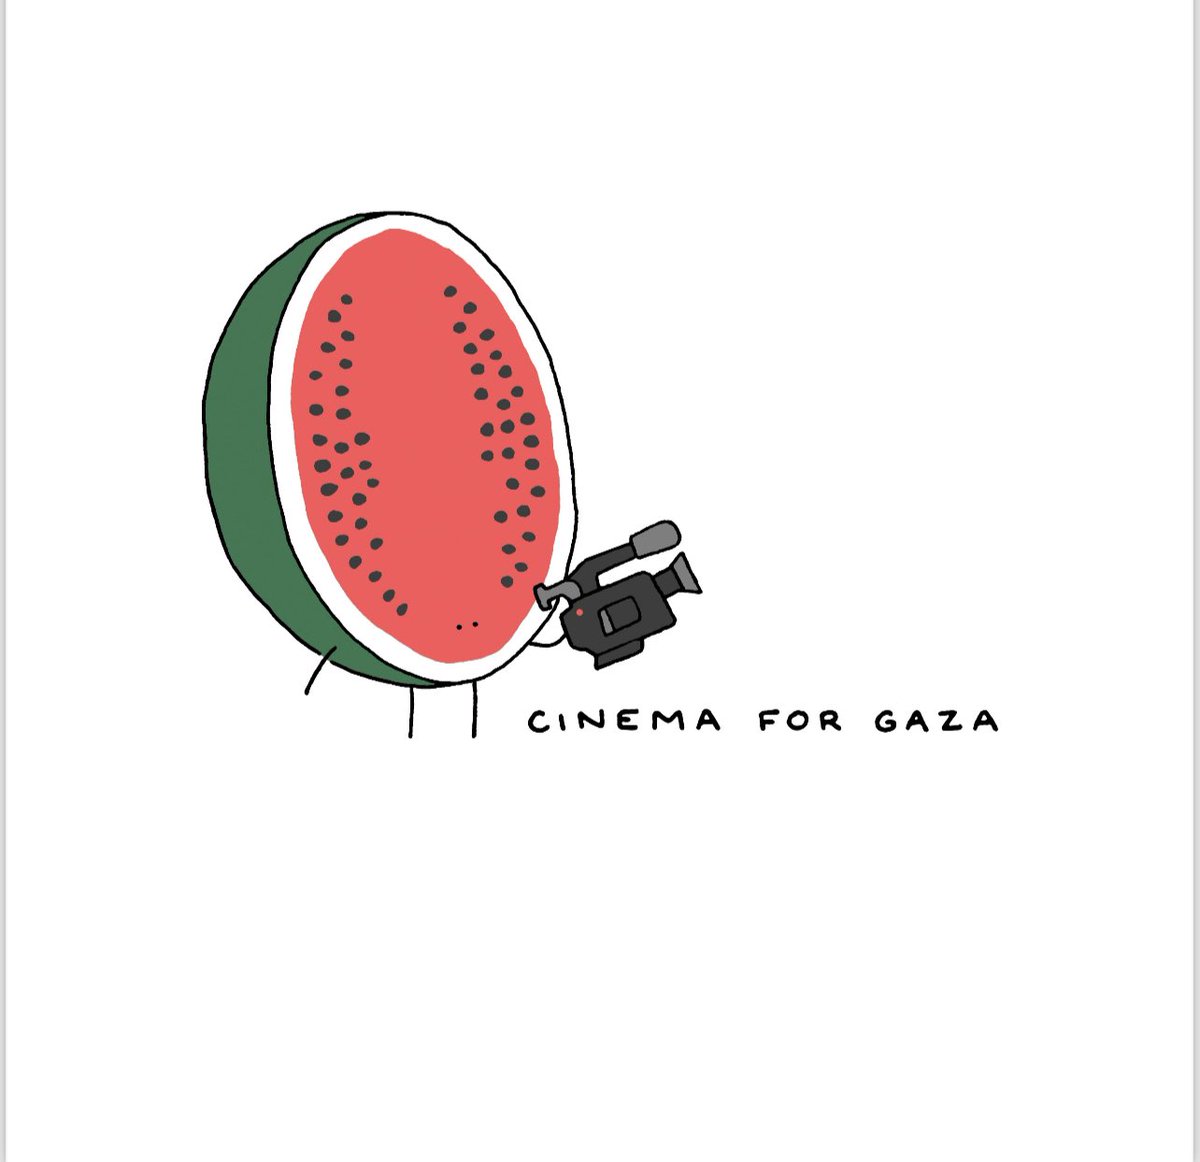 Less than an hour left to get a t shirt or tote! weareprintsocial.com/cinema-for-gaza